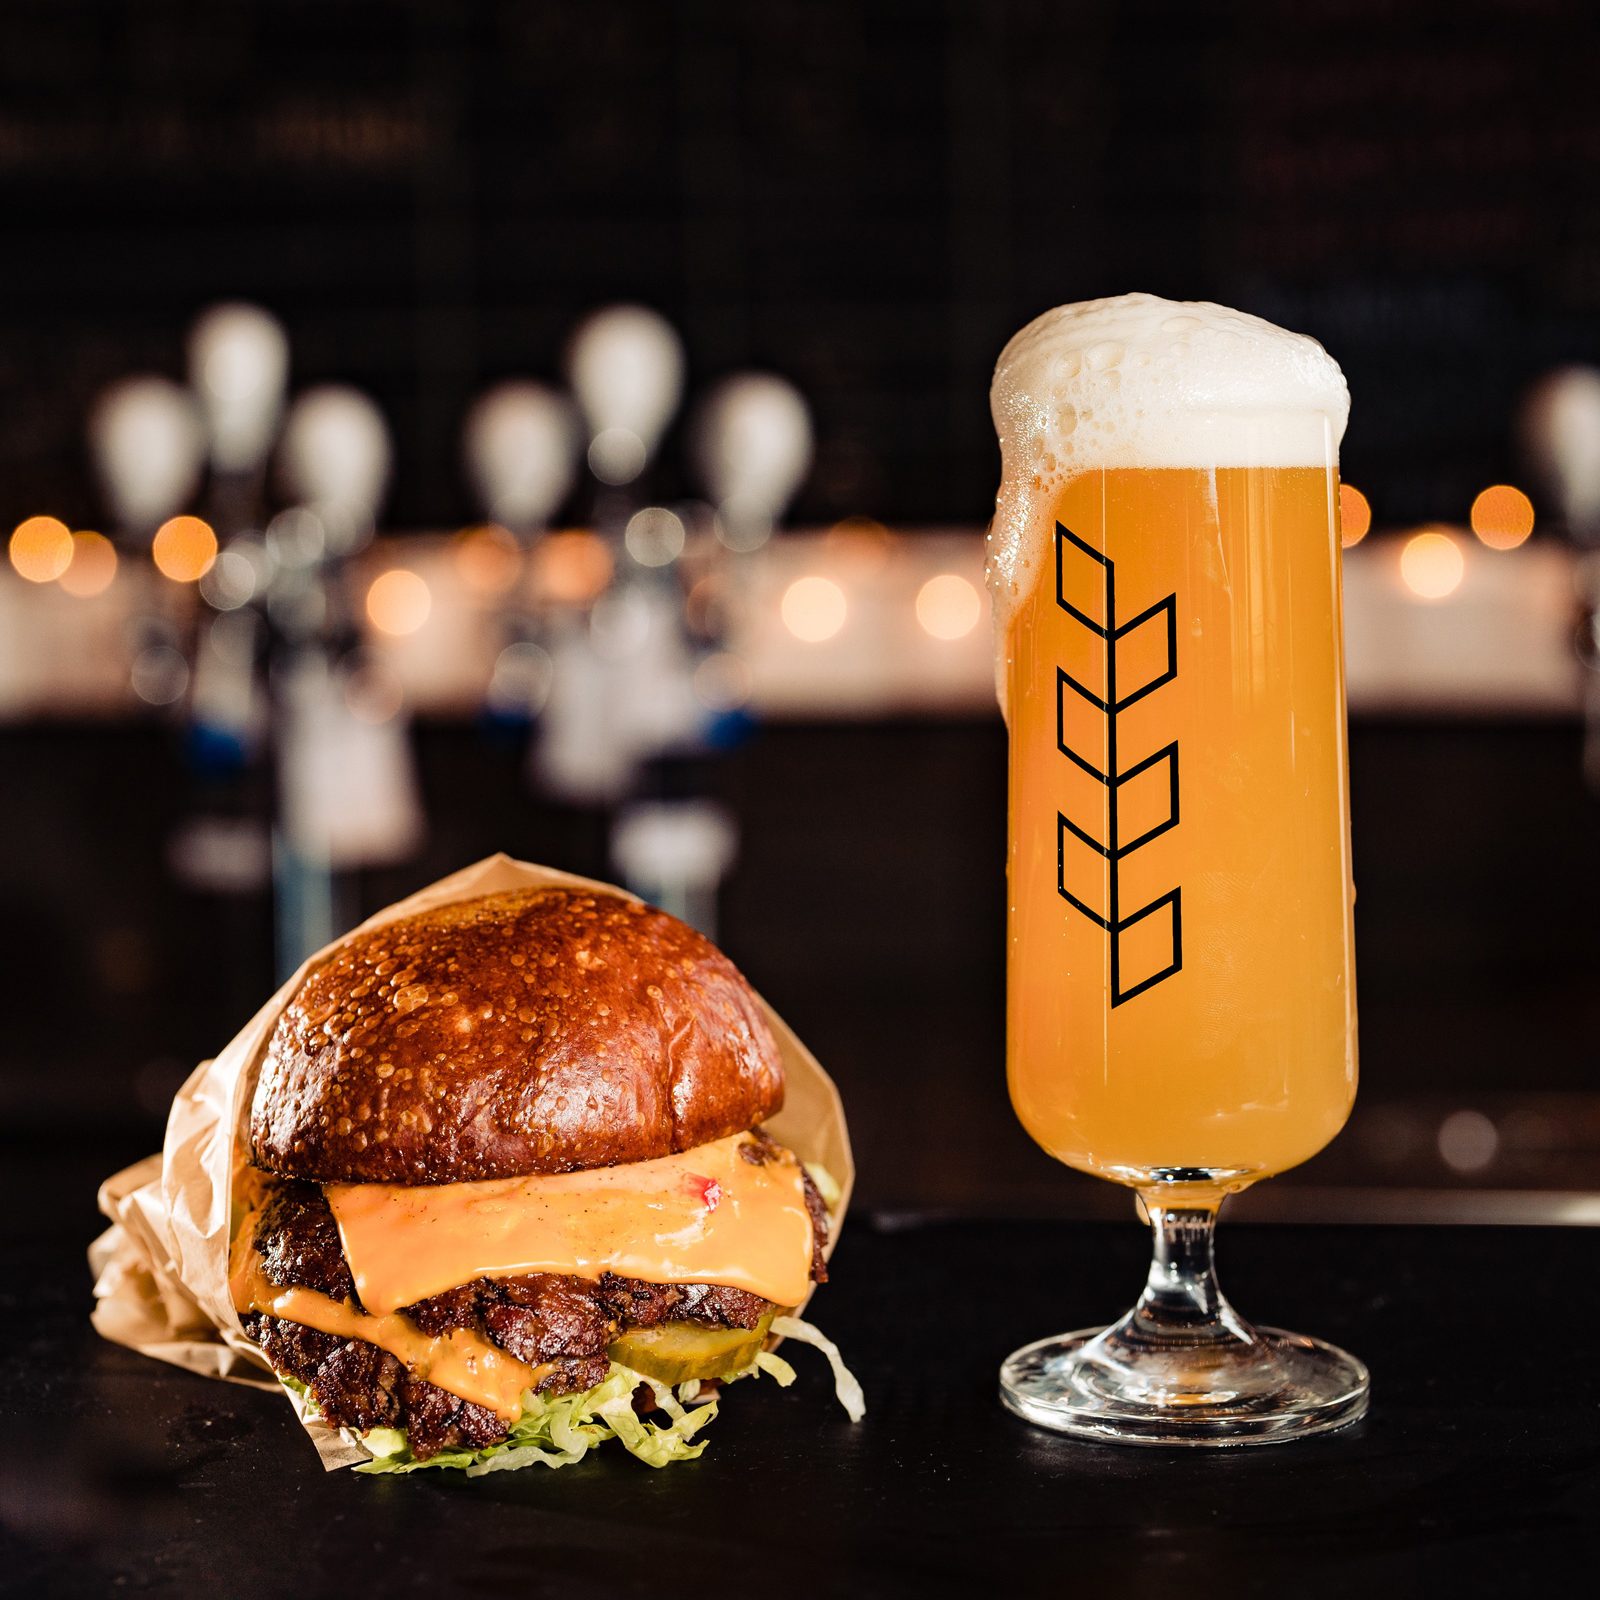 Burger and glass of beer, Subversive Malting and Brewing